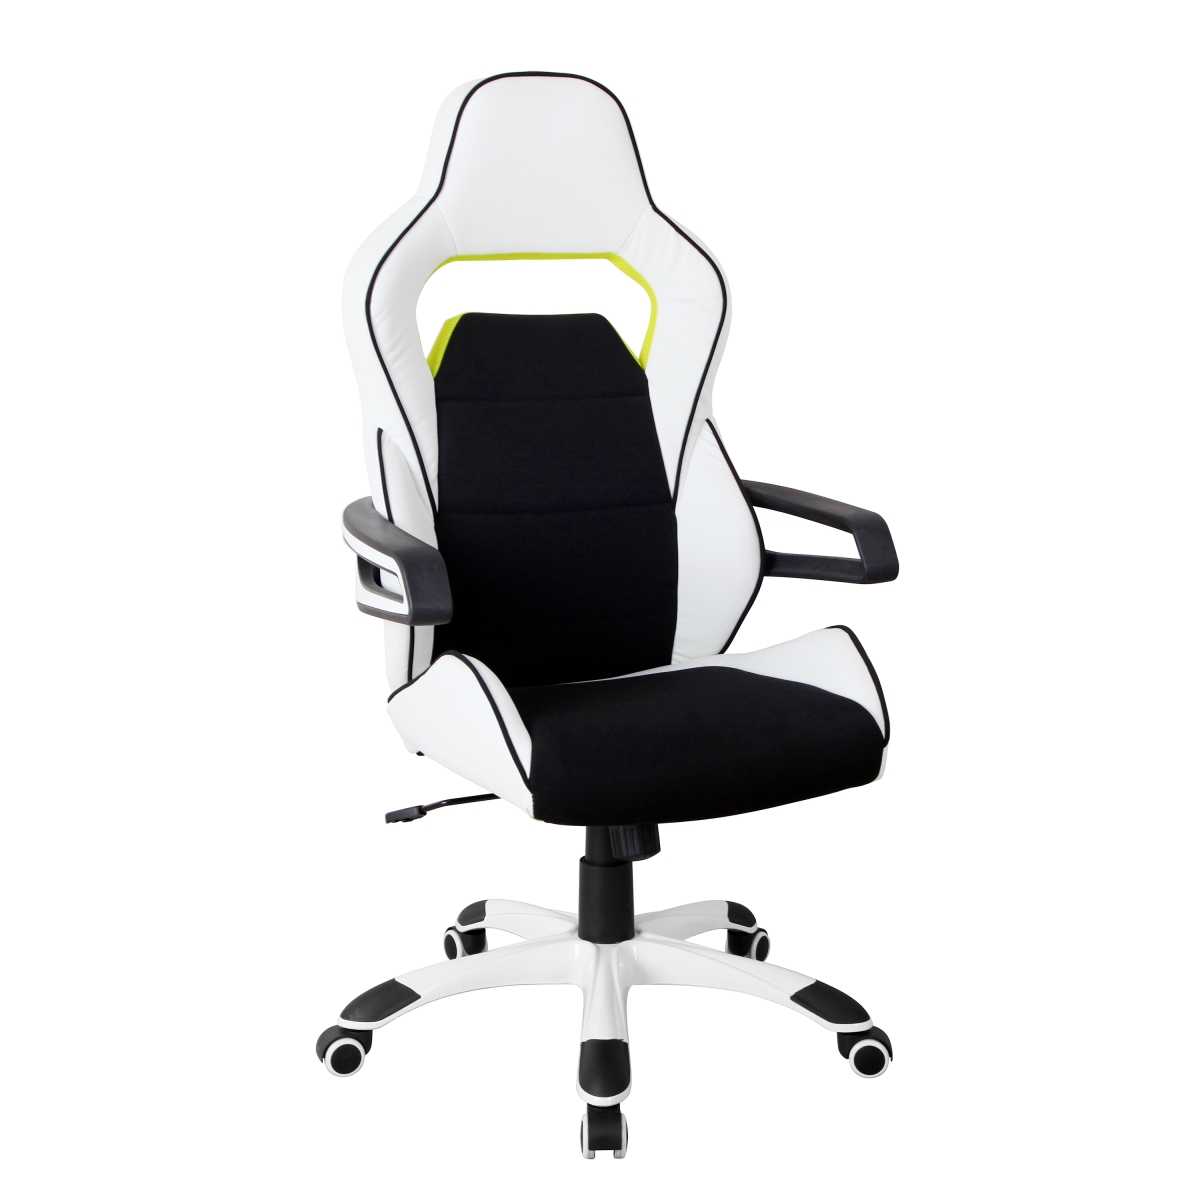 Rta-2021-wht Ergonomic Essential Racing Style Home & Office Chair, White